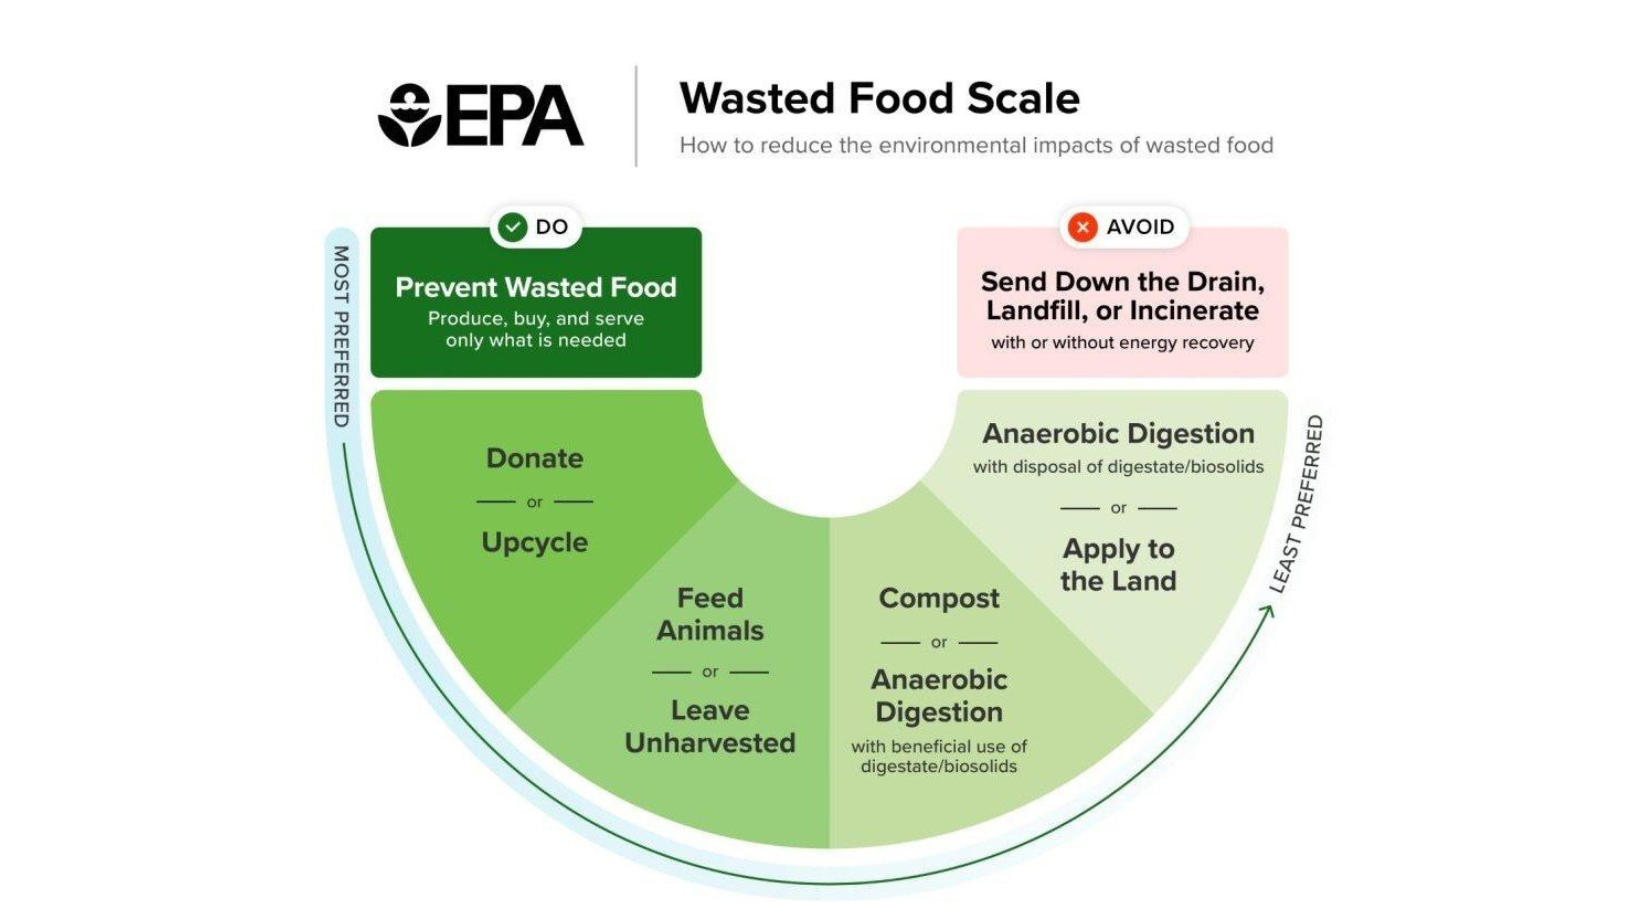 EPA's food waste scale showing pathways for reducing food waste, from most to least preferred